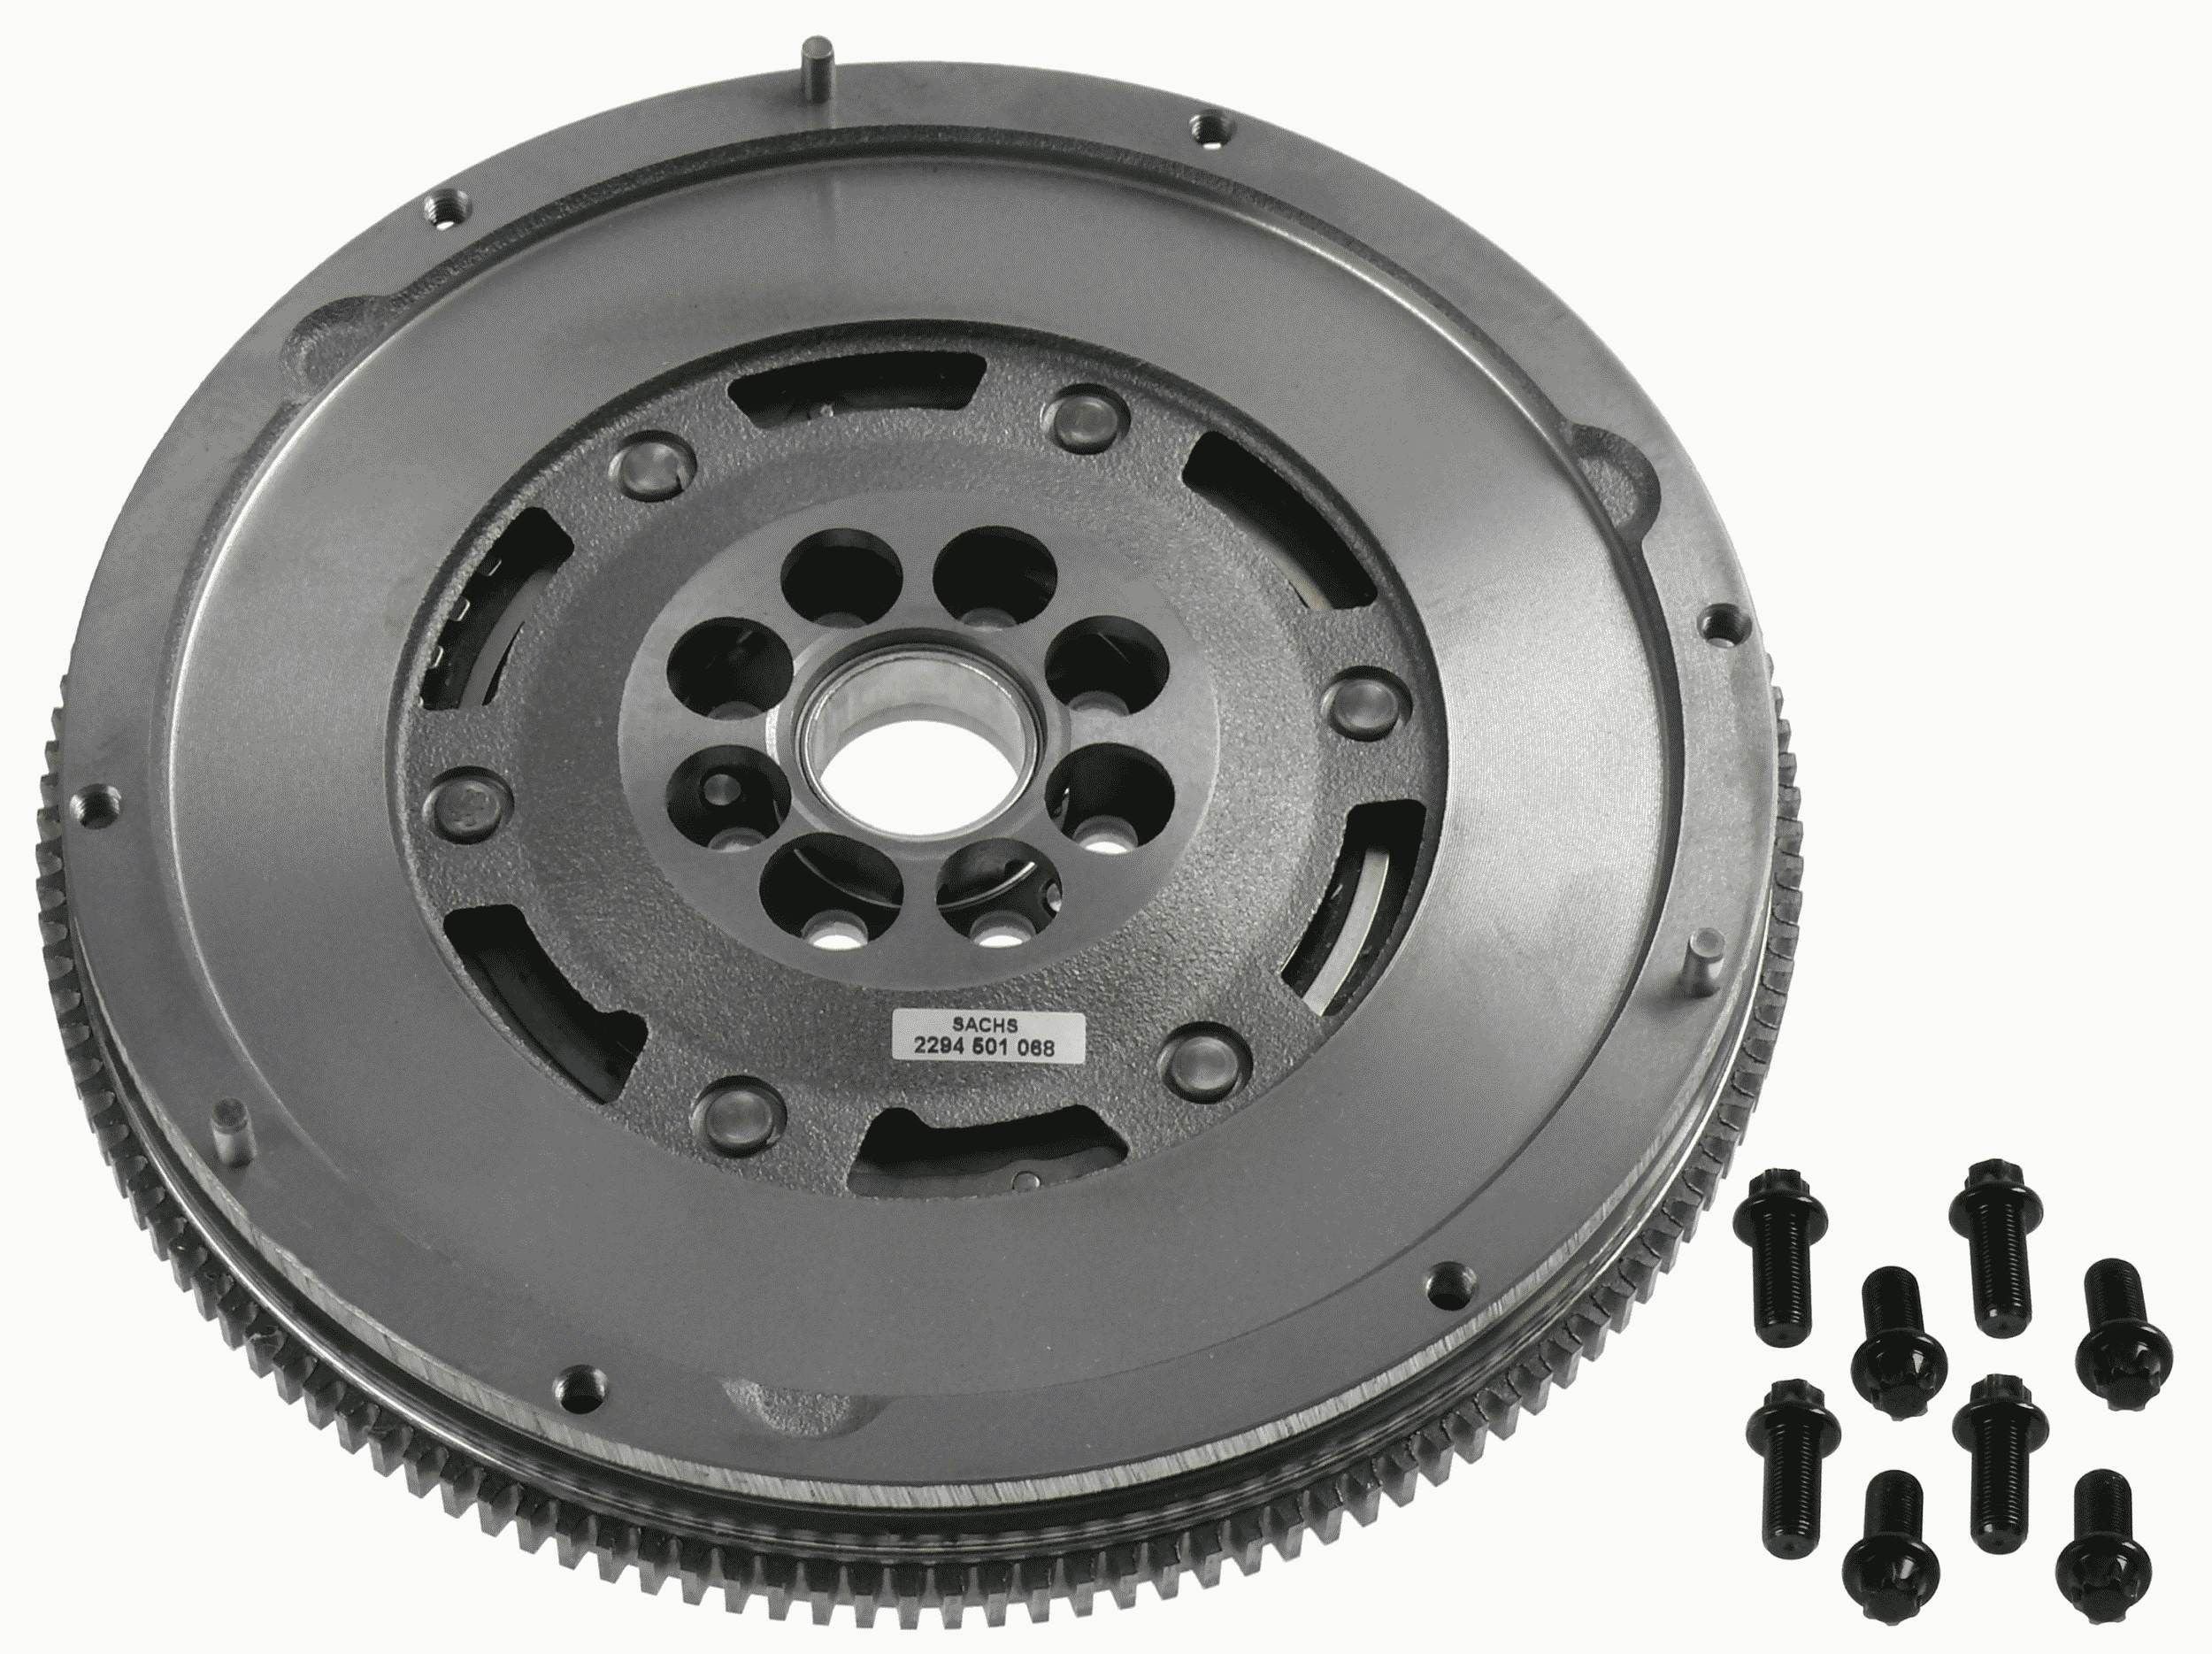 Clutch flywheel 2294 501 068 Ford FOCUS 2004 – buy replacement parts